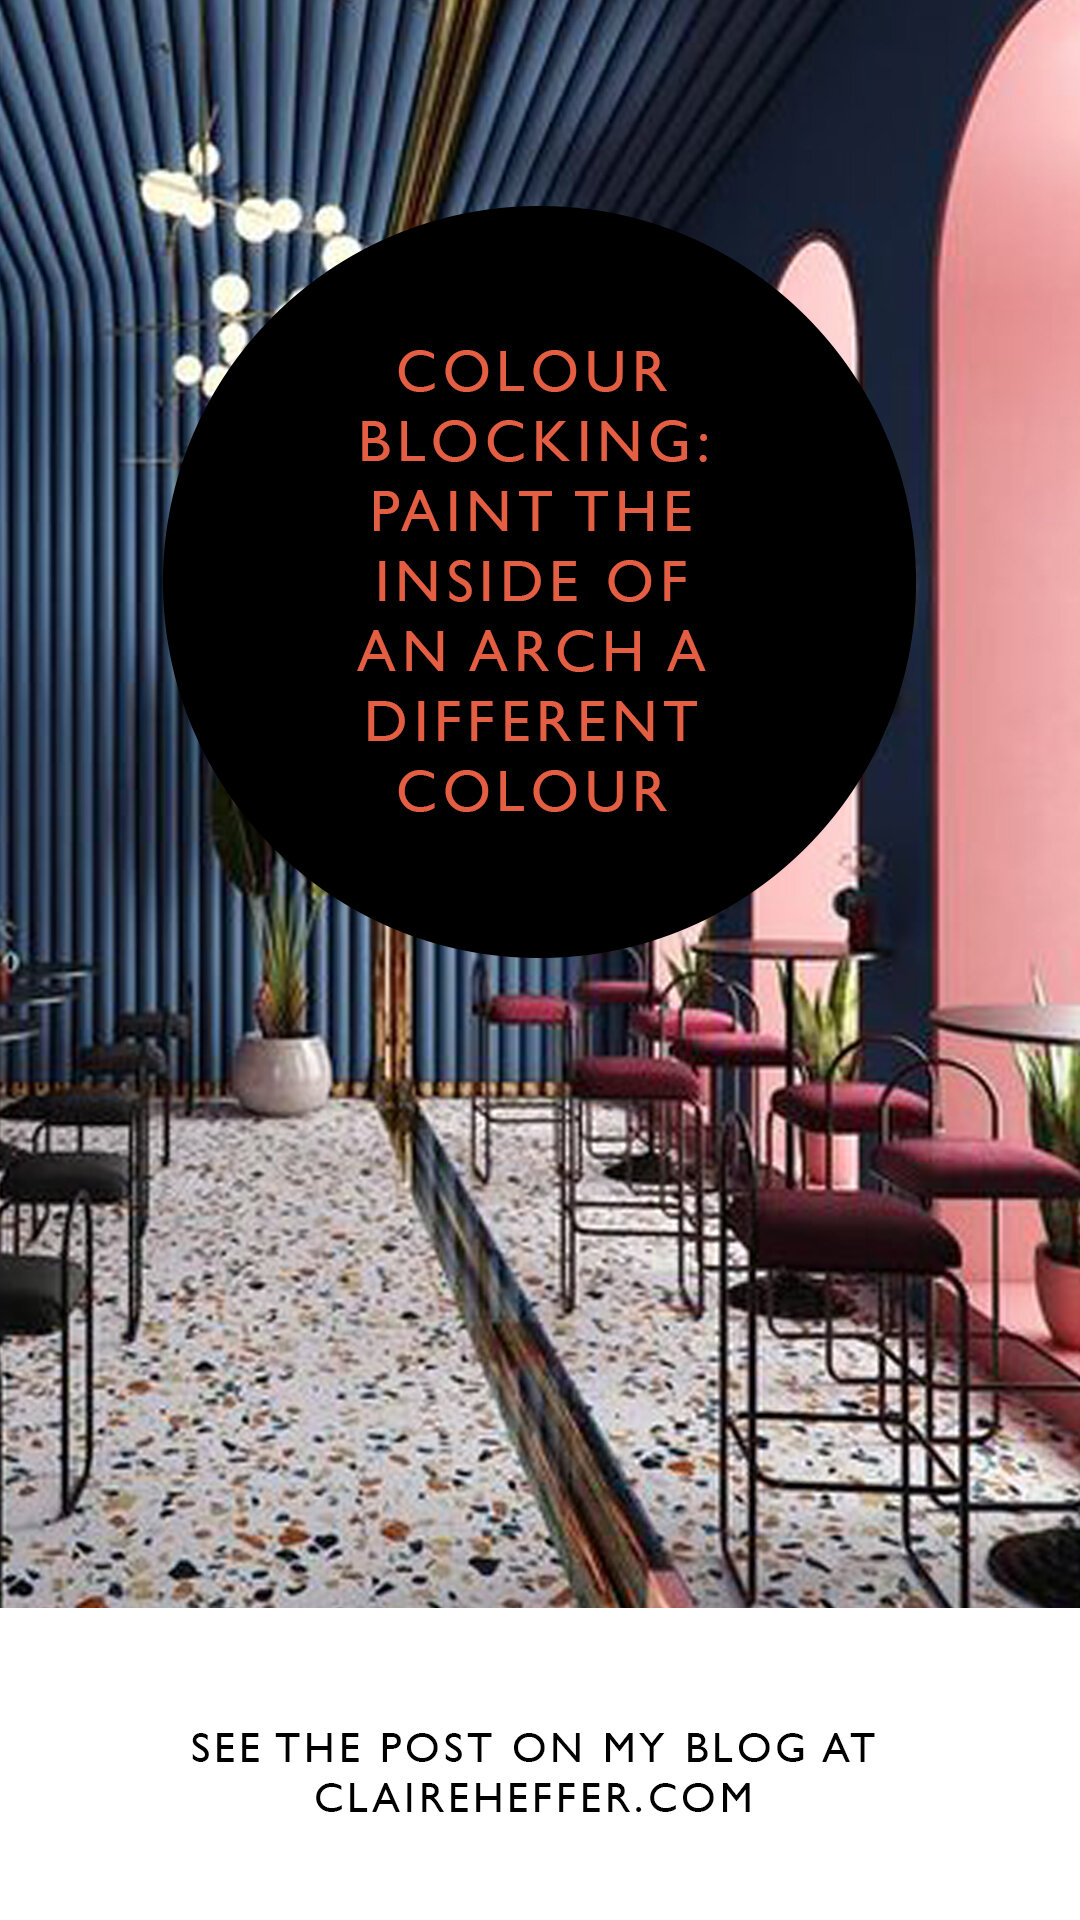 COLOUR BLOCKING- PAINT THE INSIDE OF AN ARCH A DIFFERENT COLOUR3.jpg